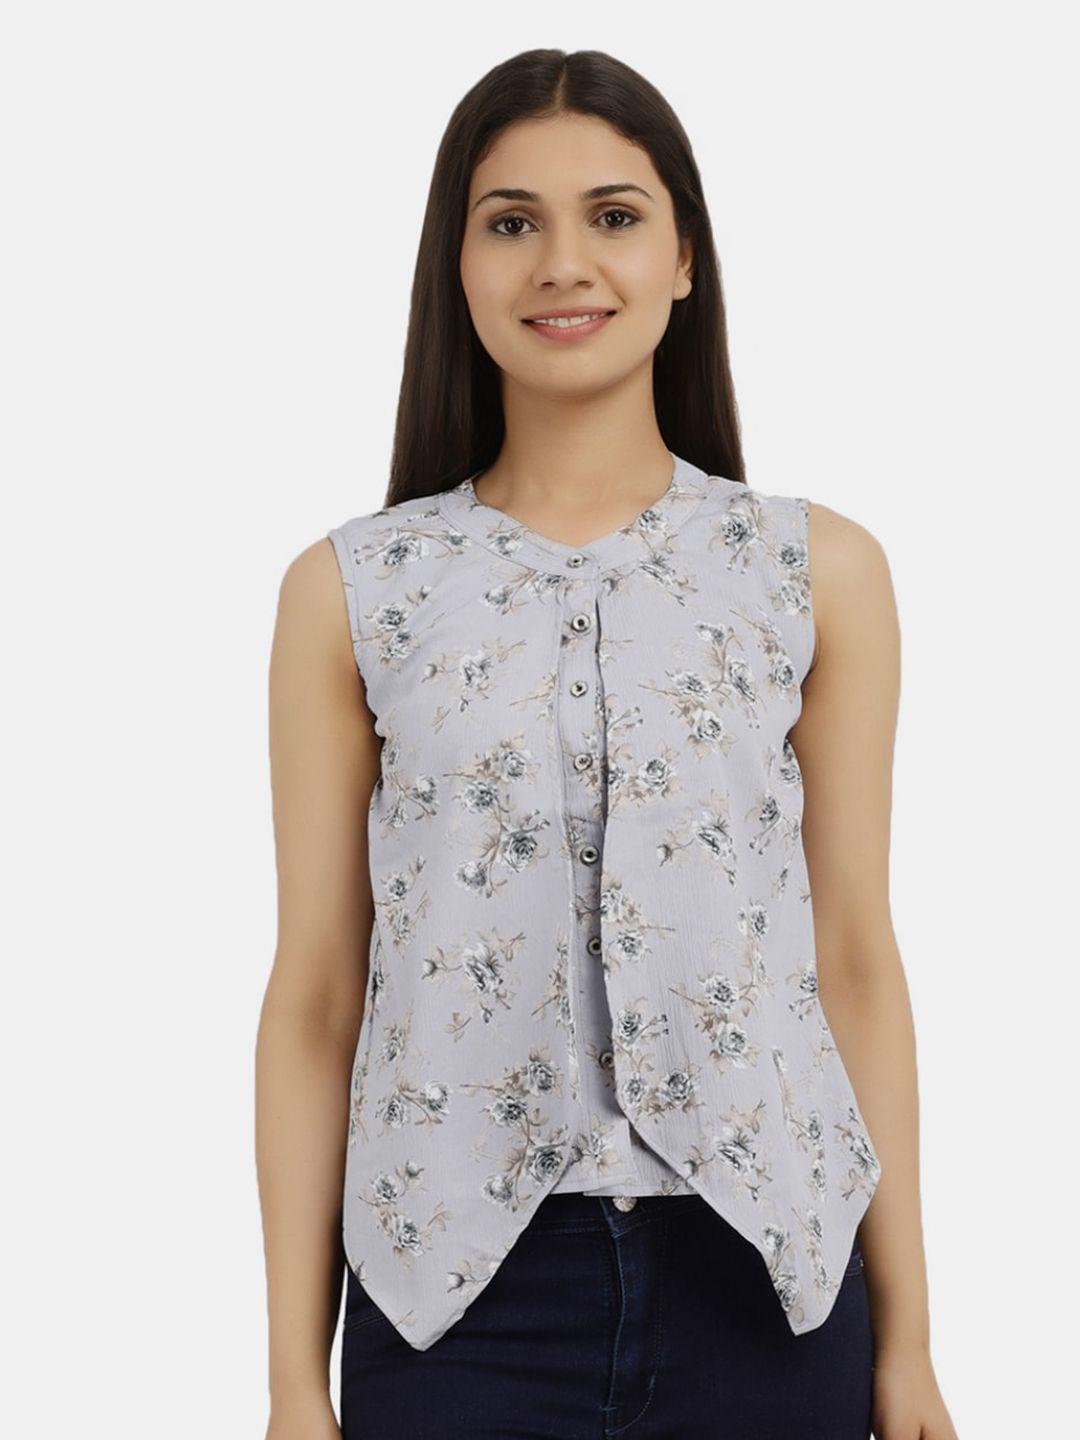 v-mart floral printed cotton sleeveless top